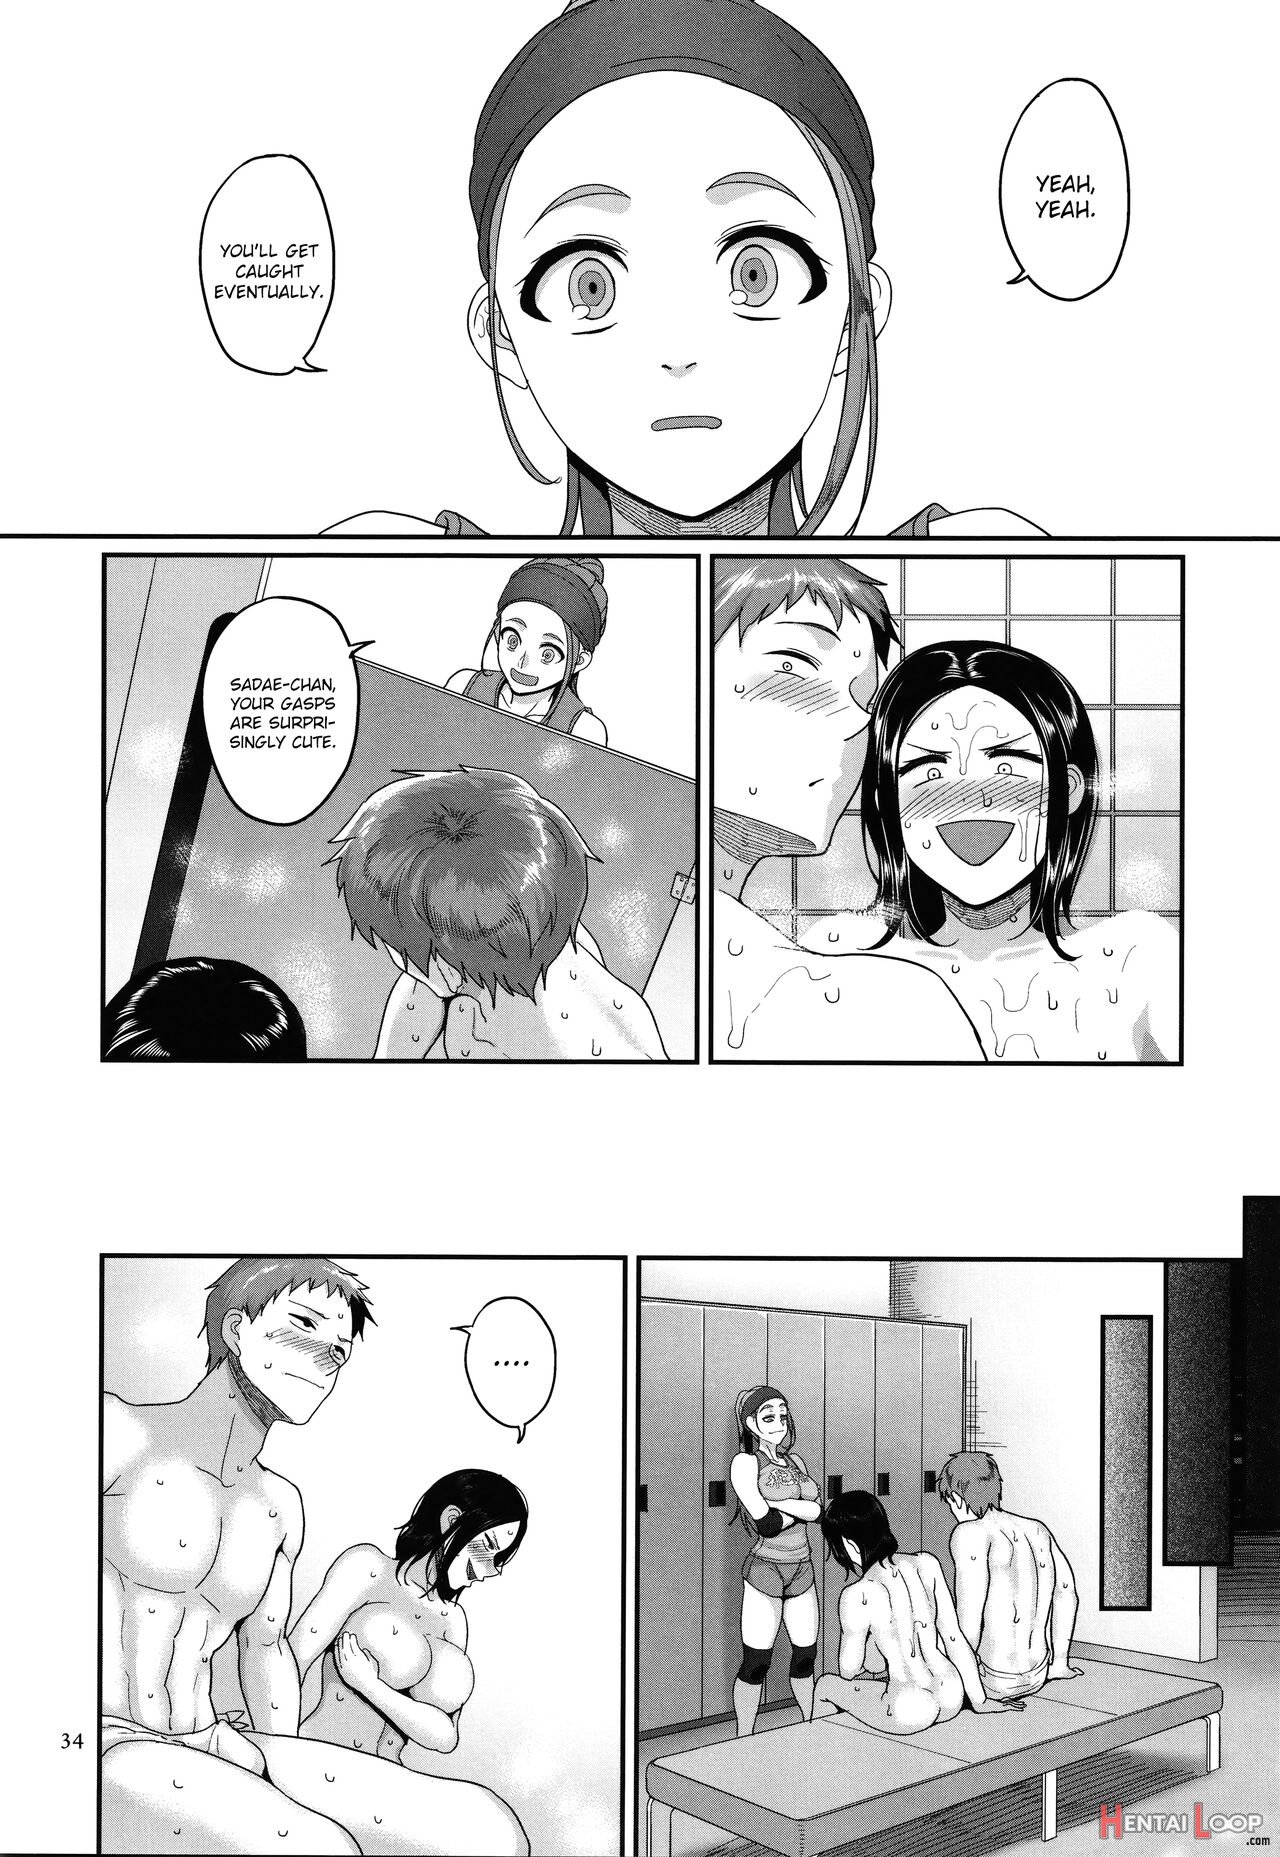 Affairs Of The Women's Volleyball Circle Of K City, S Prefecture 1 page 36